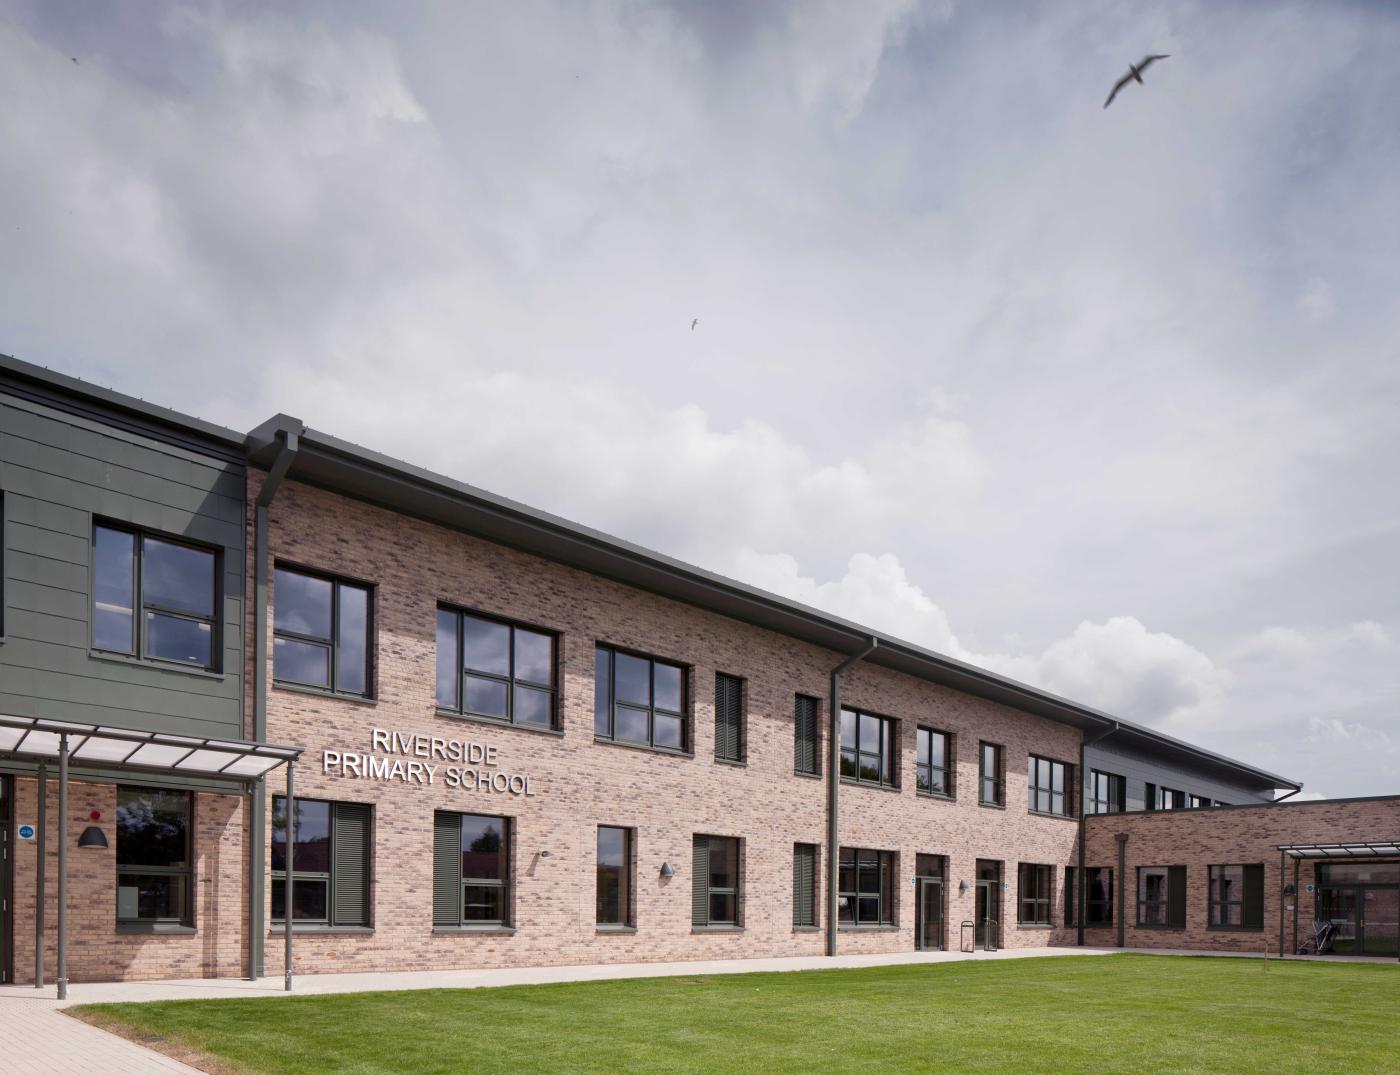 Riverside Primary School in Perth, one of the first Passivhaus schools in Scotland